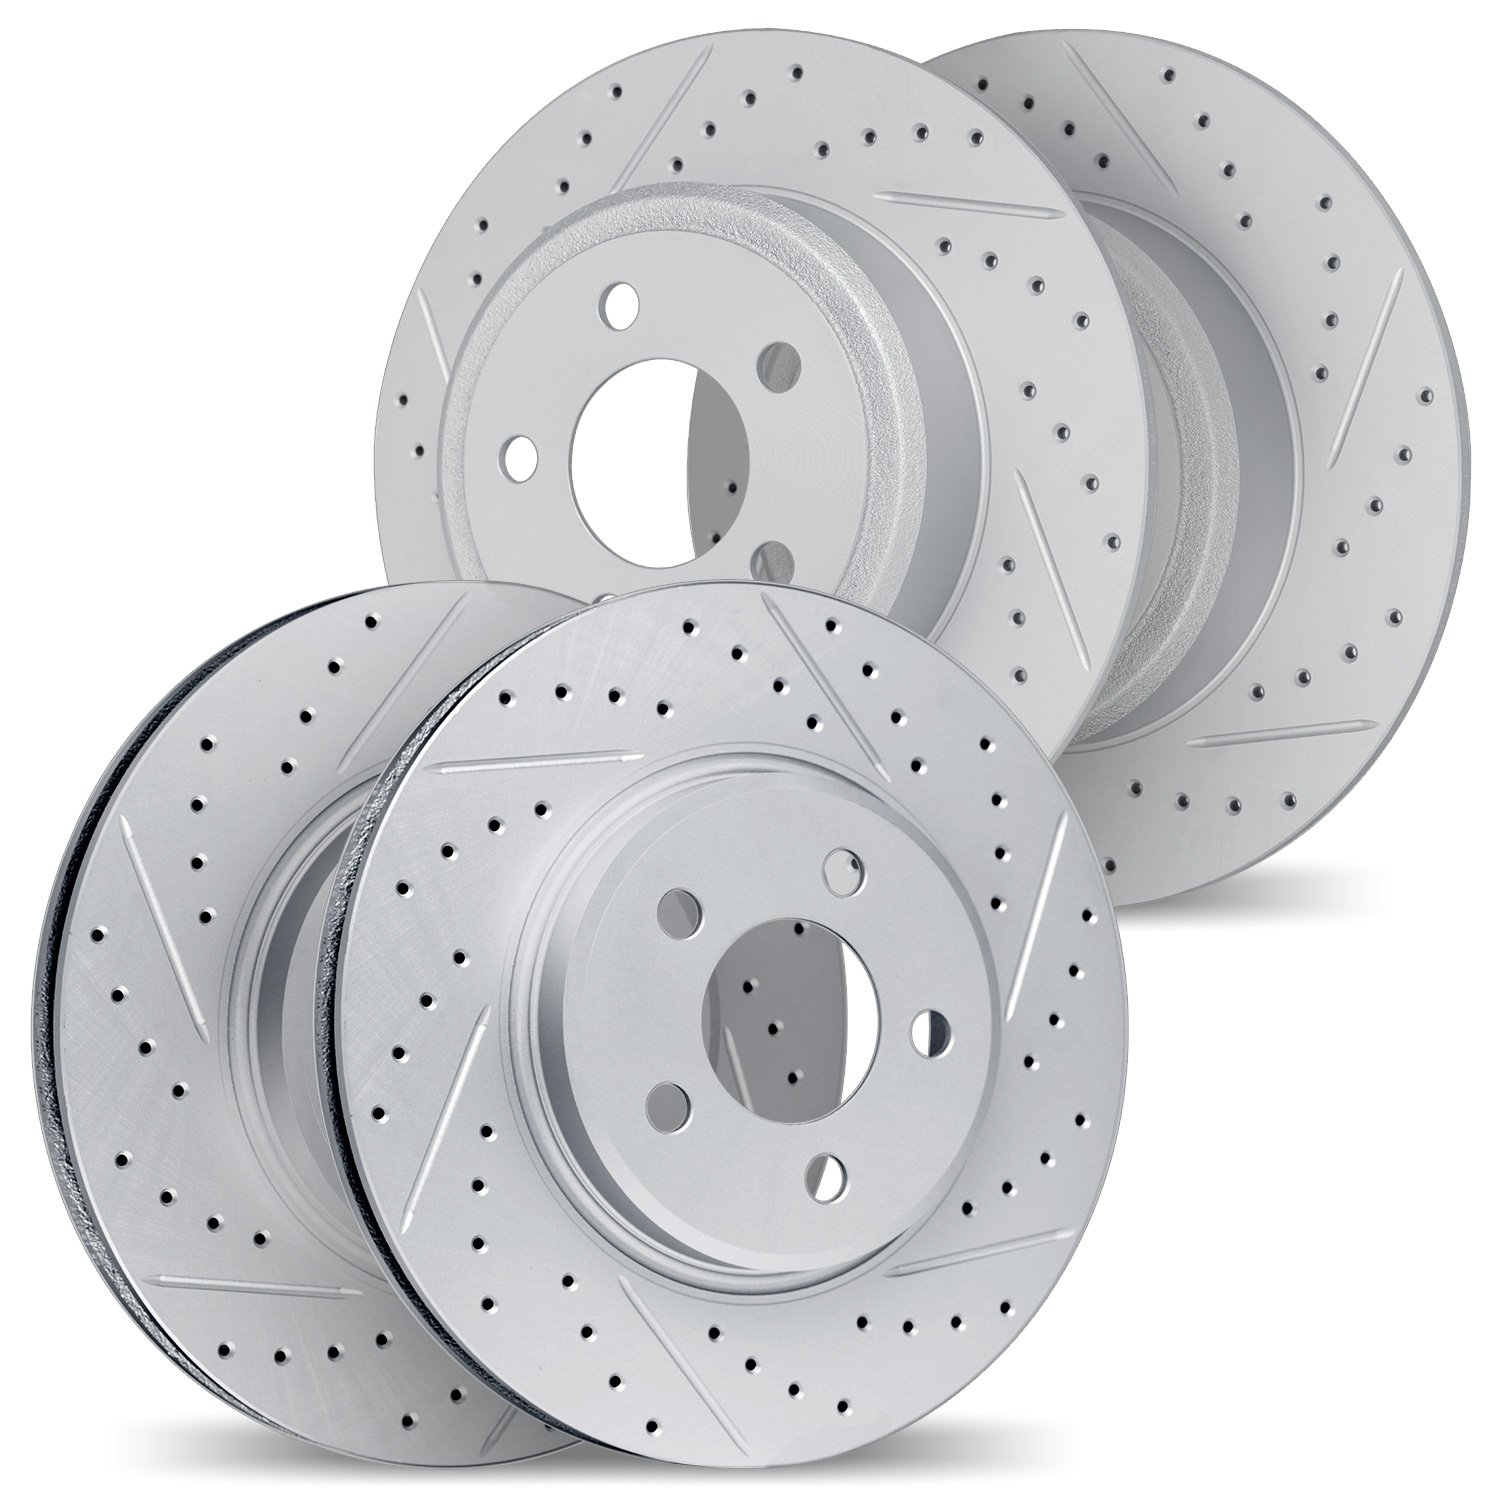 2004-54176 Geoperformance Drilled/Slotted Brake Rotors, 1993-2000 Ford/Lincoln/Mercury/Mazda, Position: Front and Rear